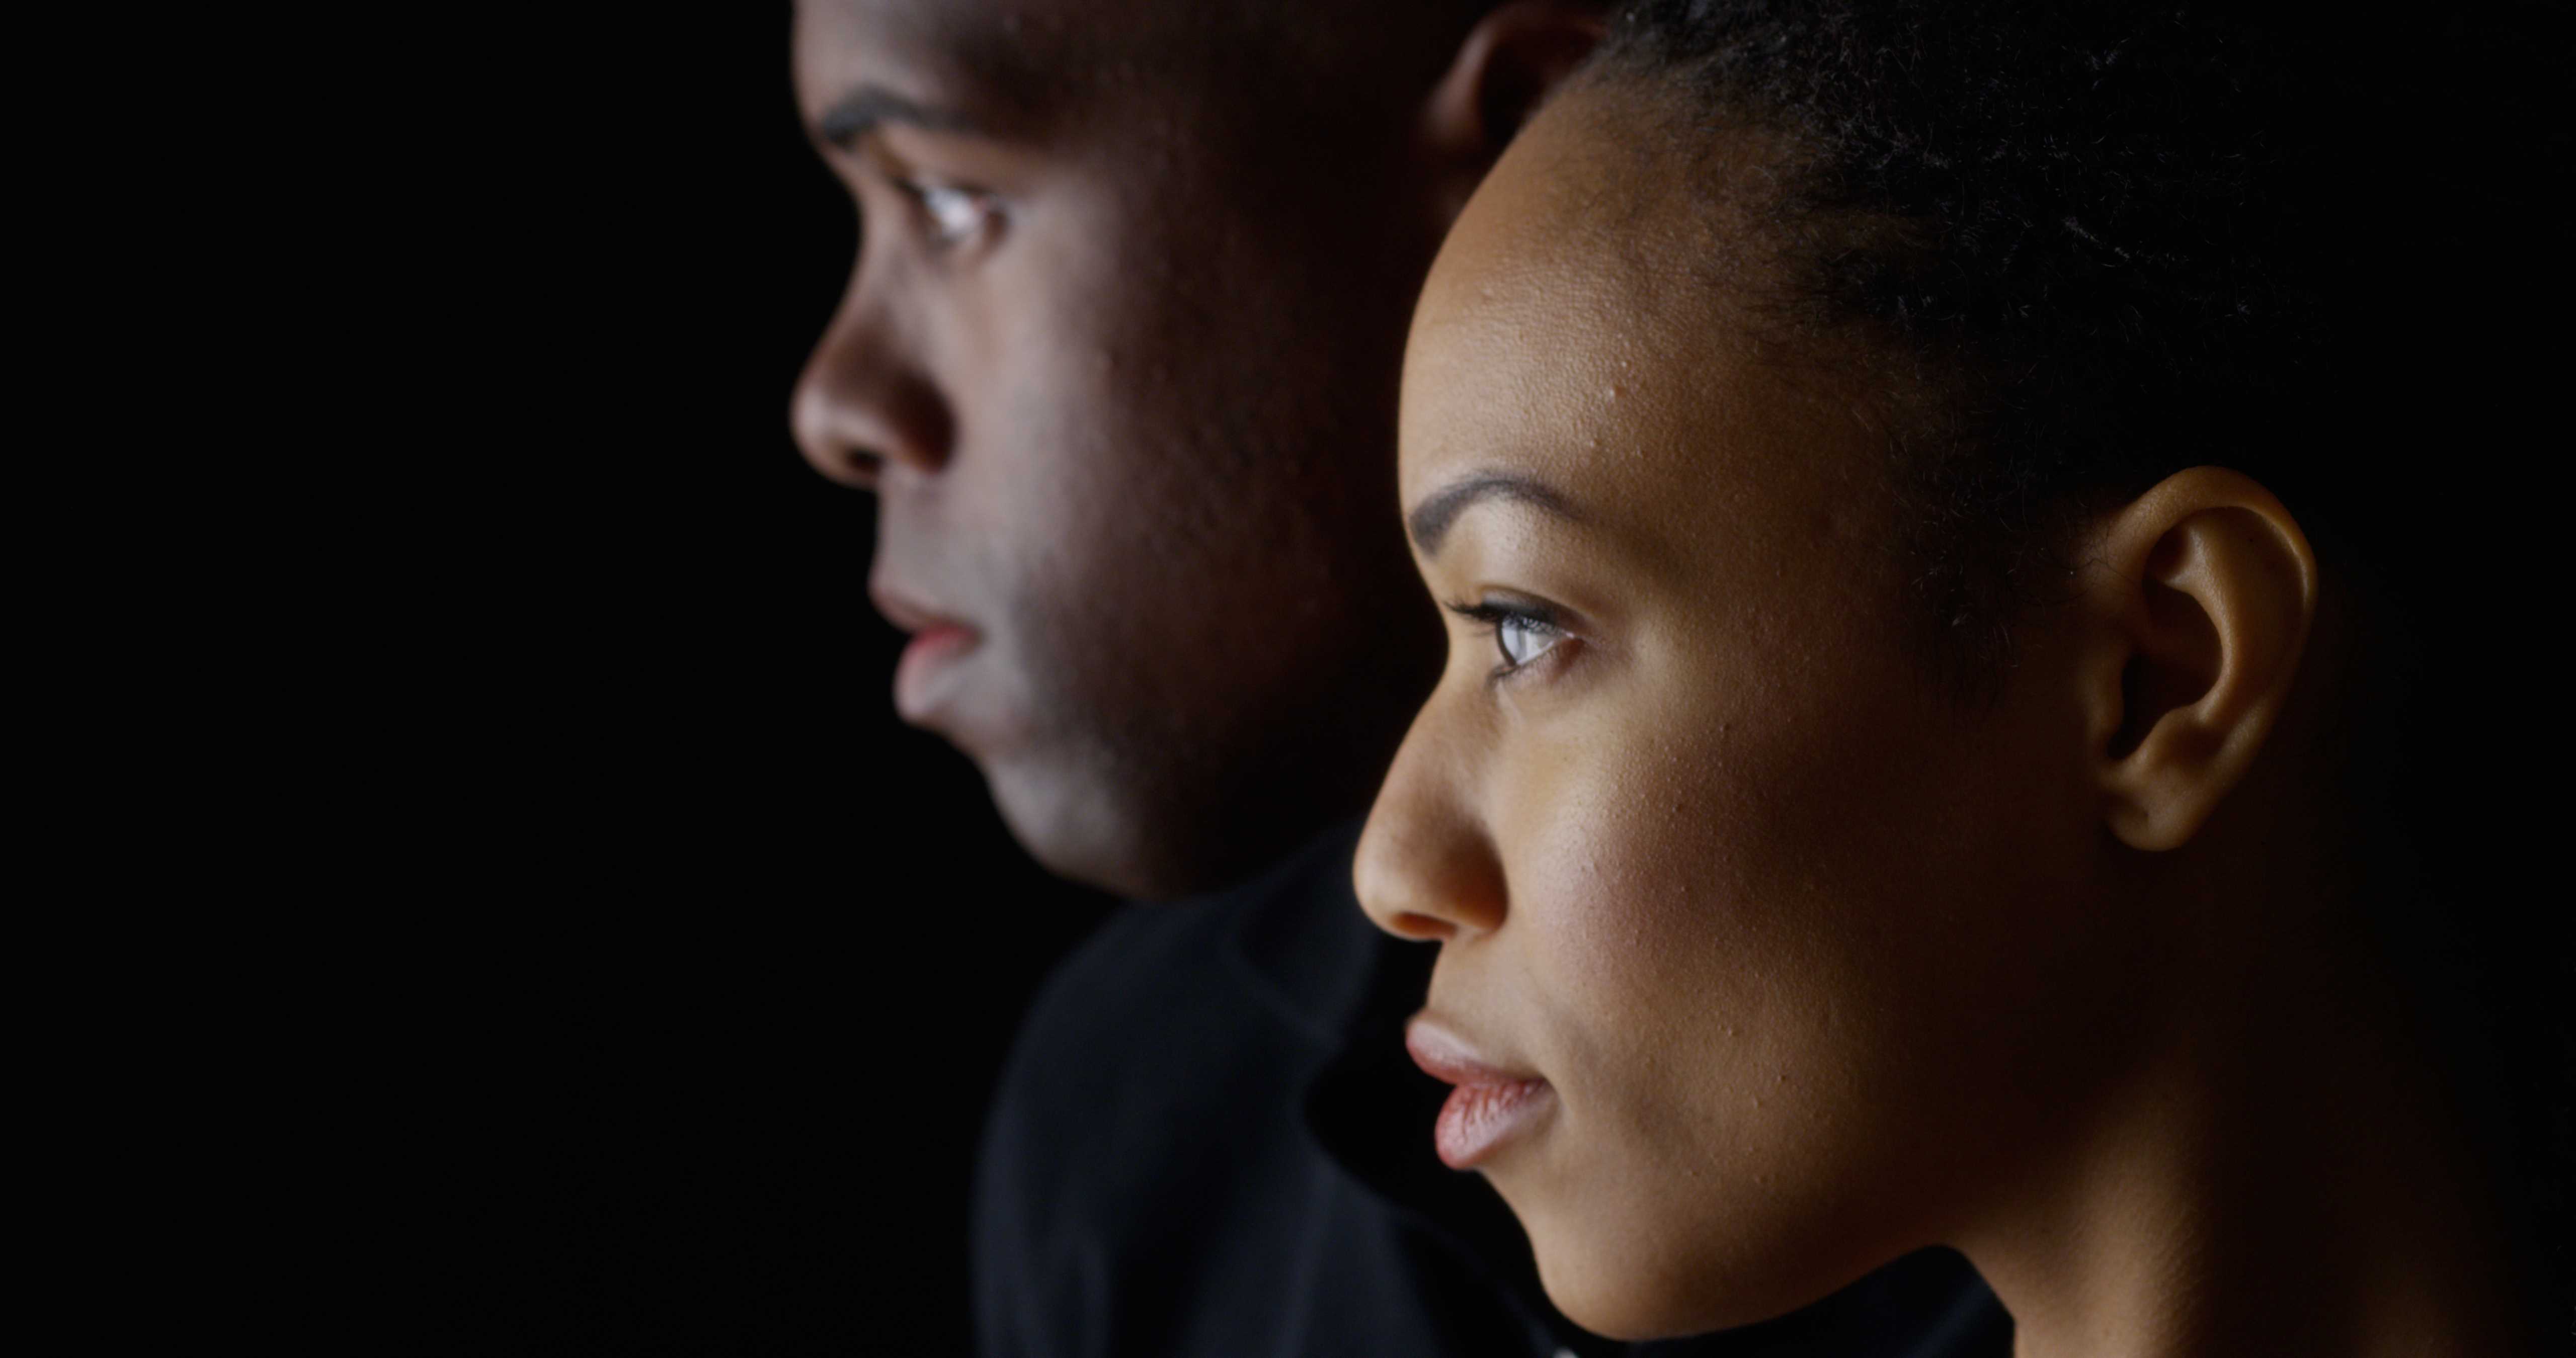 Profile image of a Black man and woman, with a dark background.